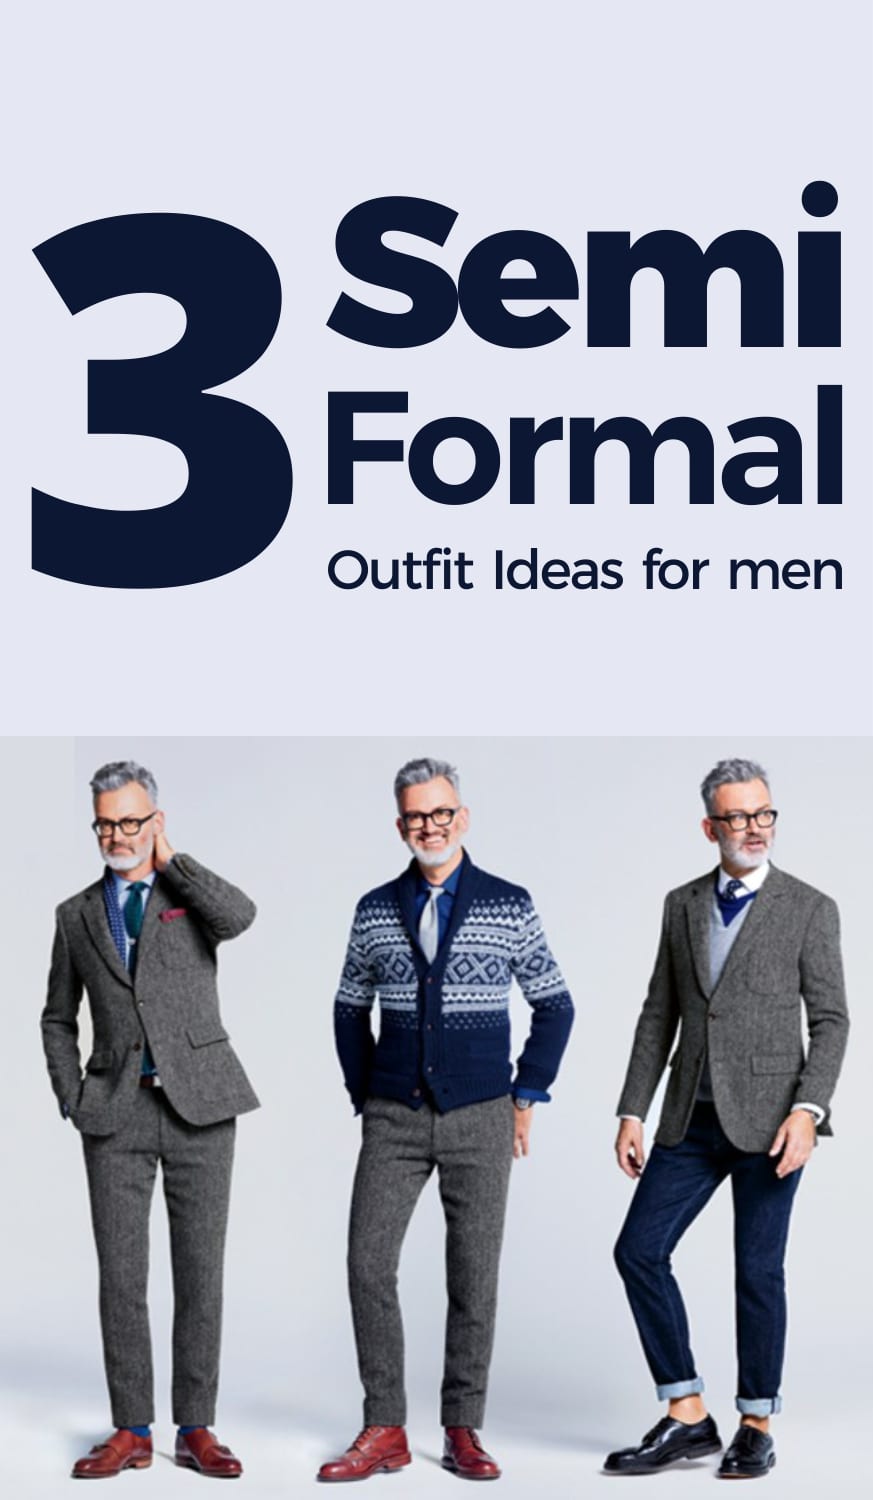 3 semi formal outfit ideas for men